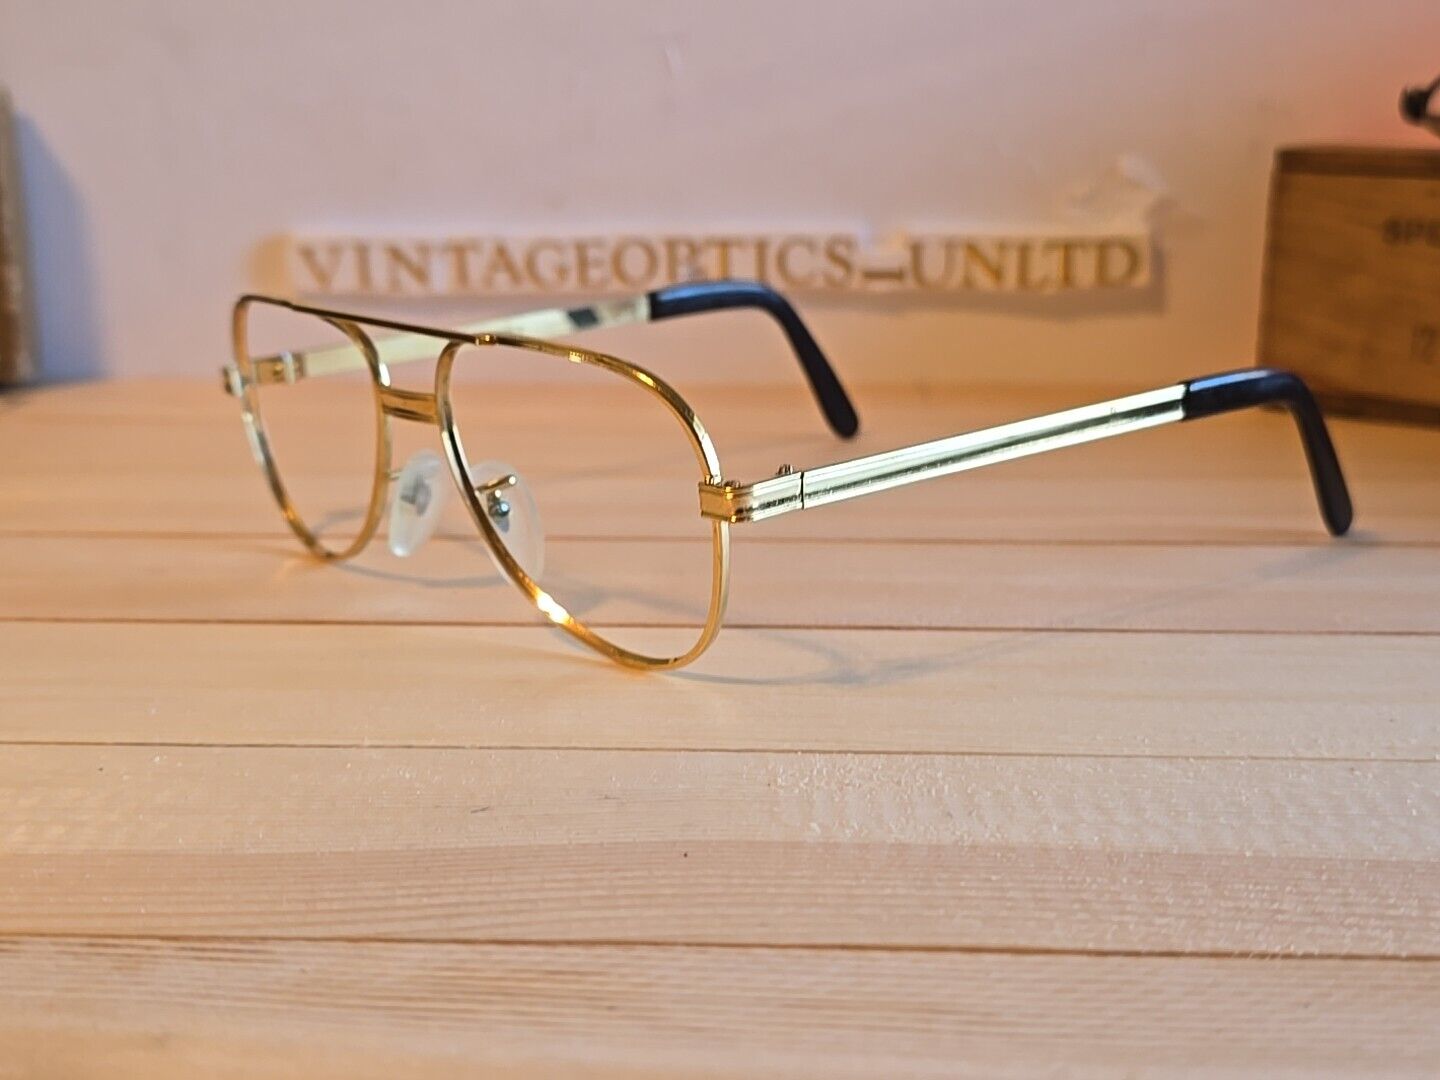 Titmus Z87-TO 1970s Gold Aviator Safety Glasses Frame. Unused. Mint Condition.